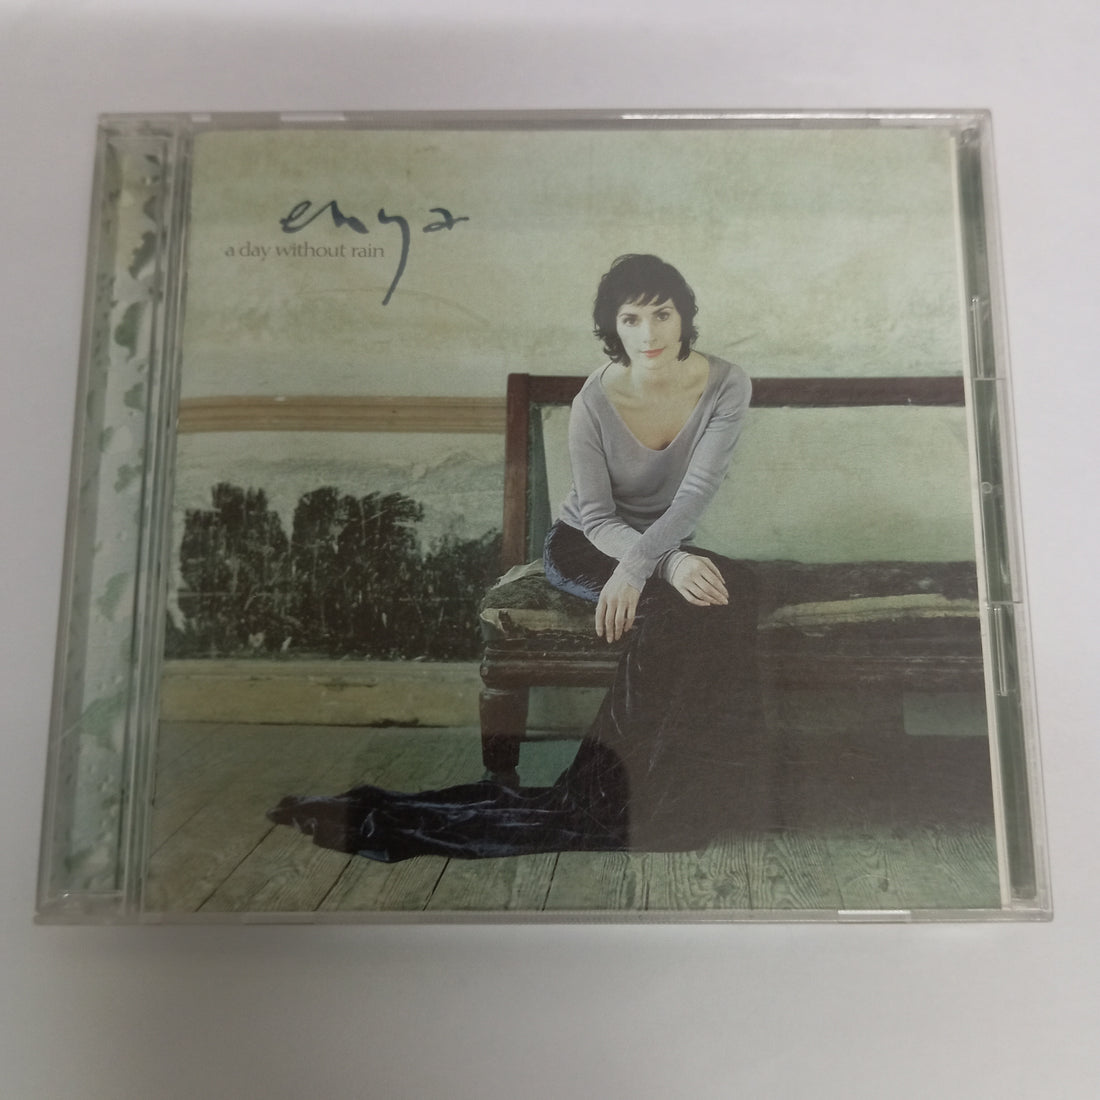 Enya - A Day Without Rain (CD) (VG)